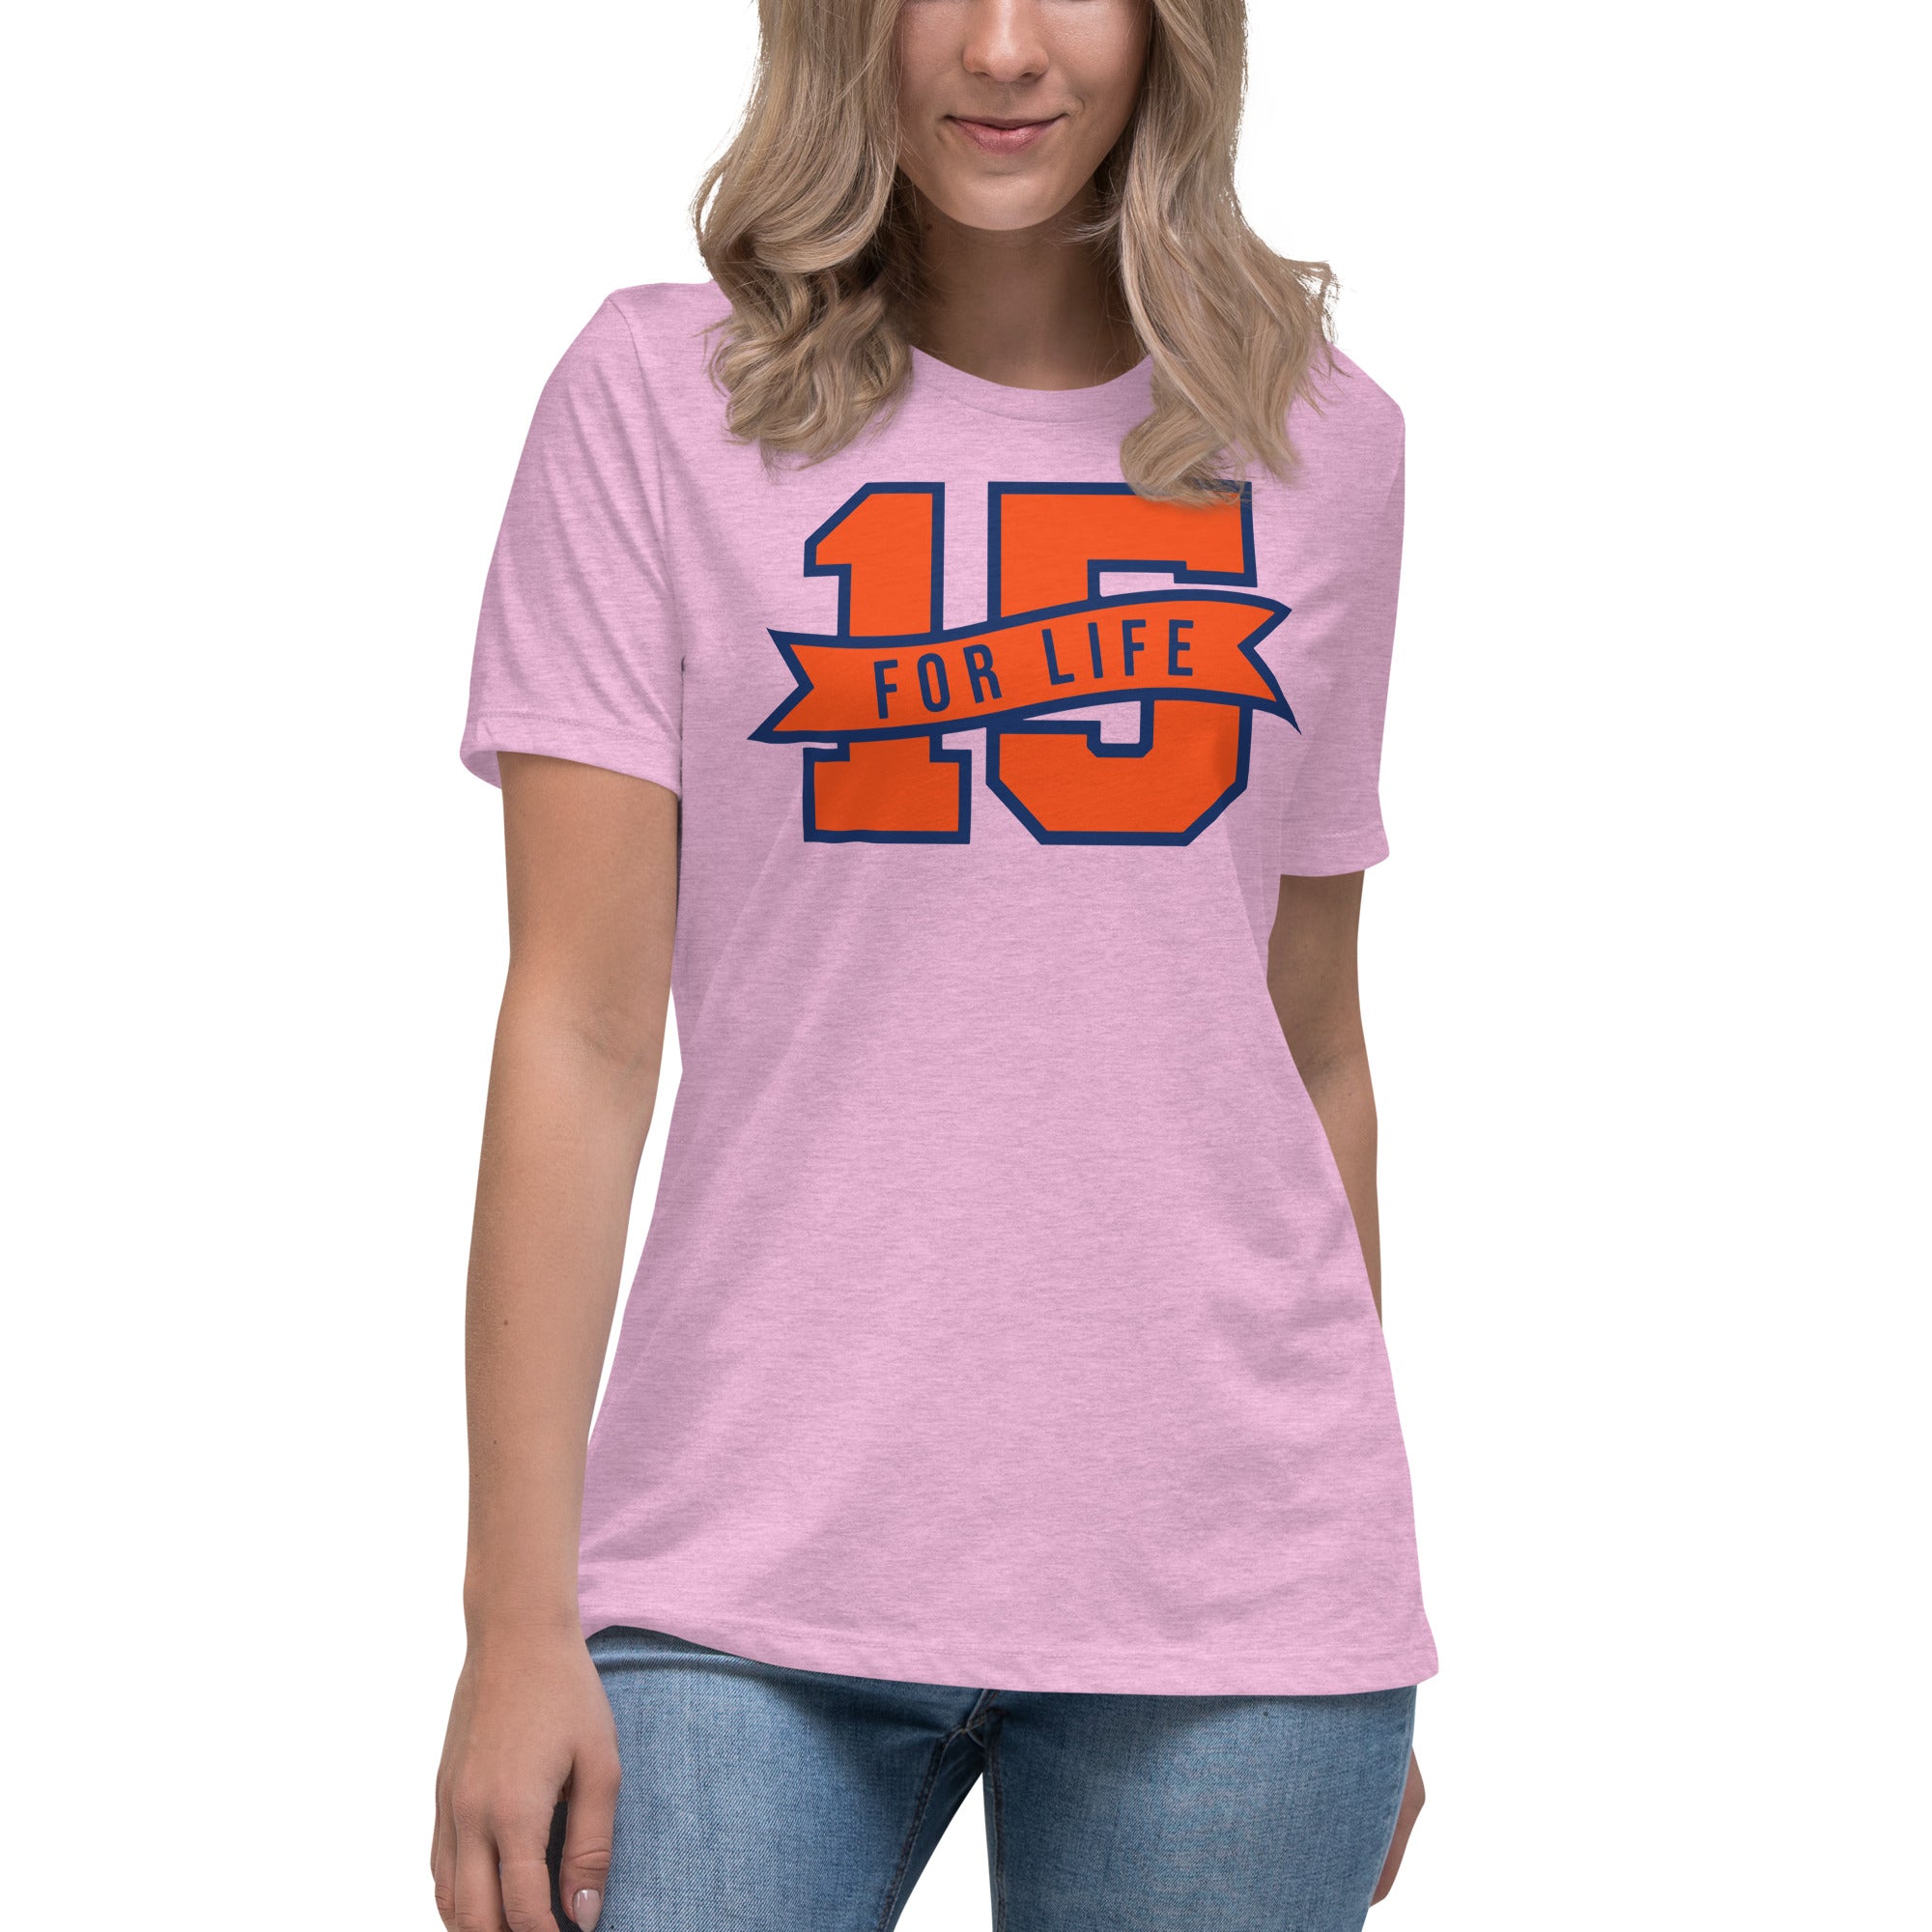 15 For Life Women's Relaxed T-Shirt